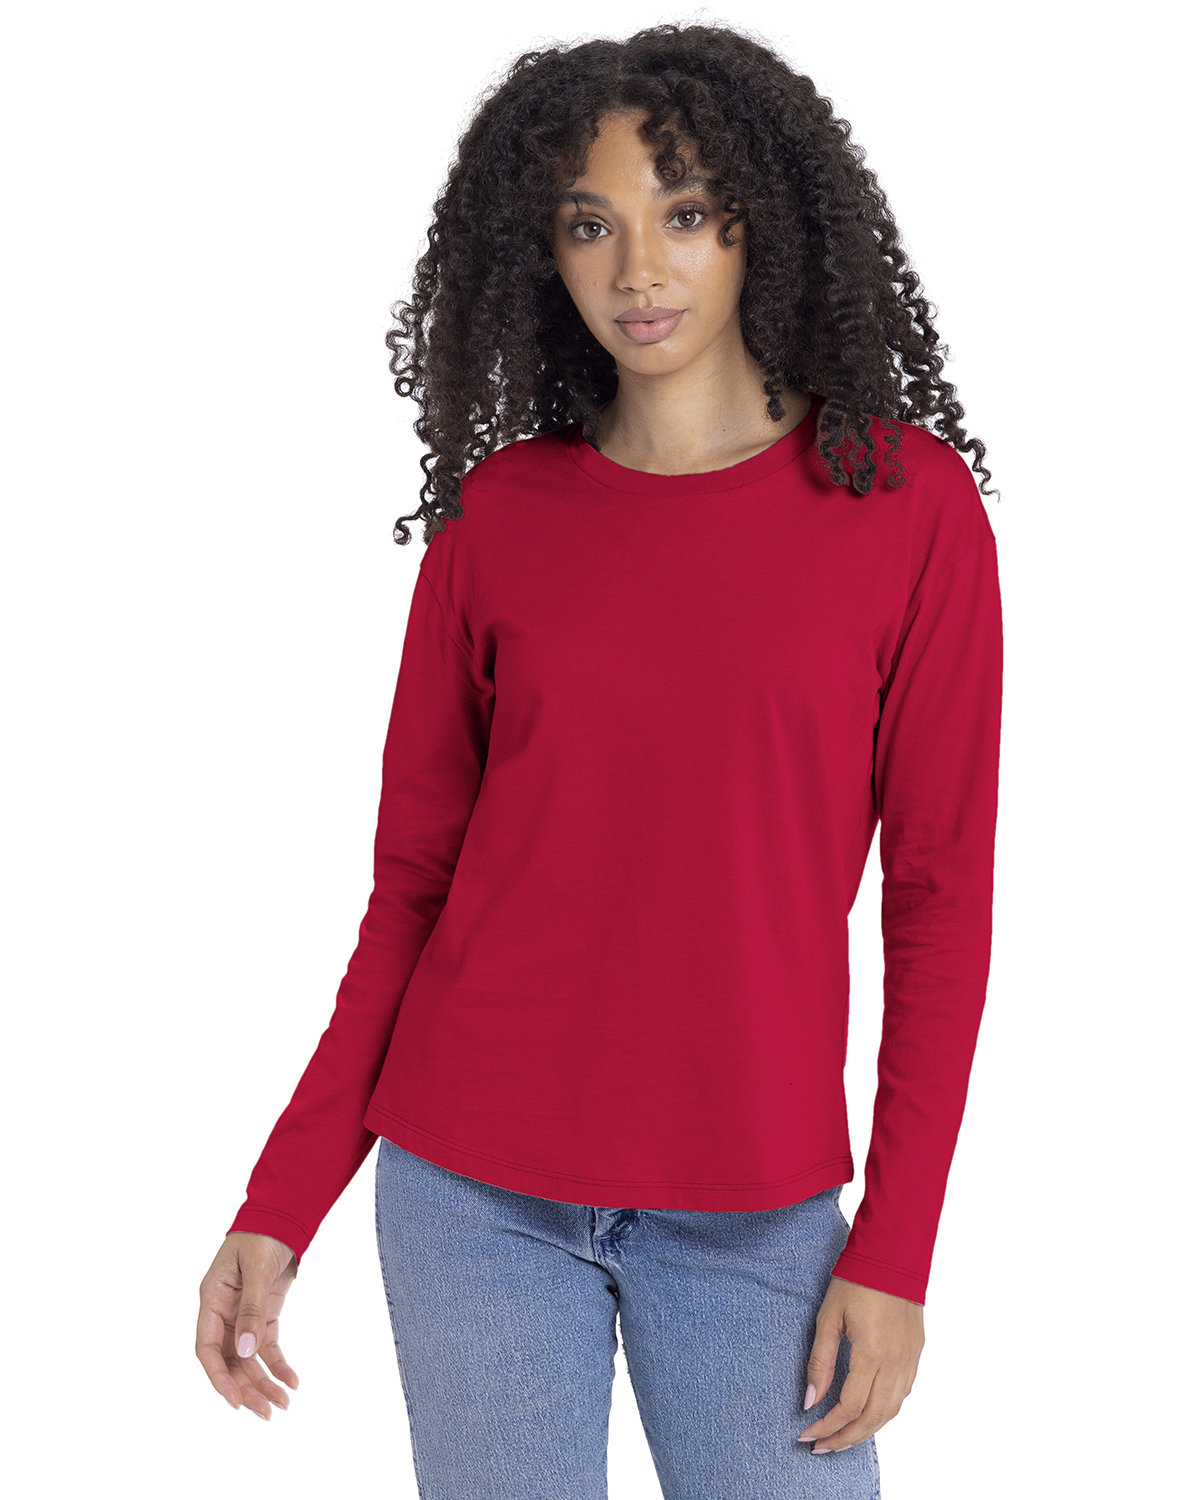 Next Level Apparel Ladies' Relaxed Long Sleeve T-Shirt | alphabroder